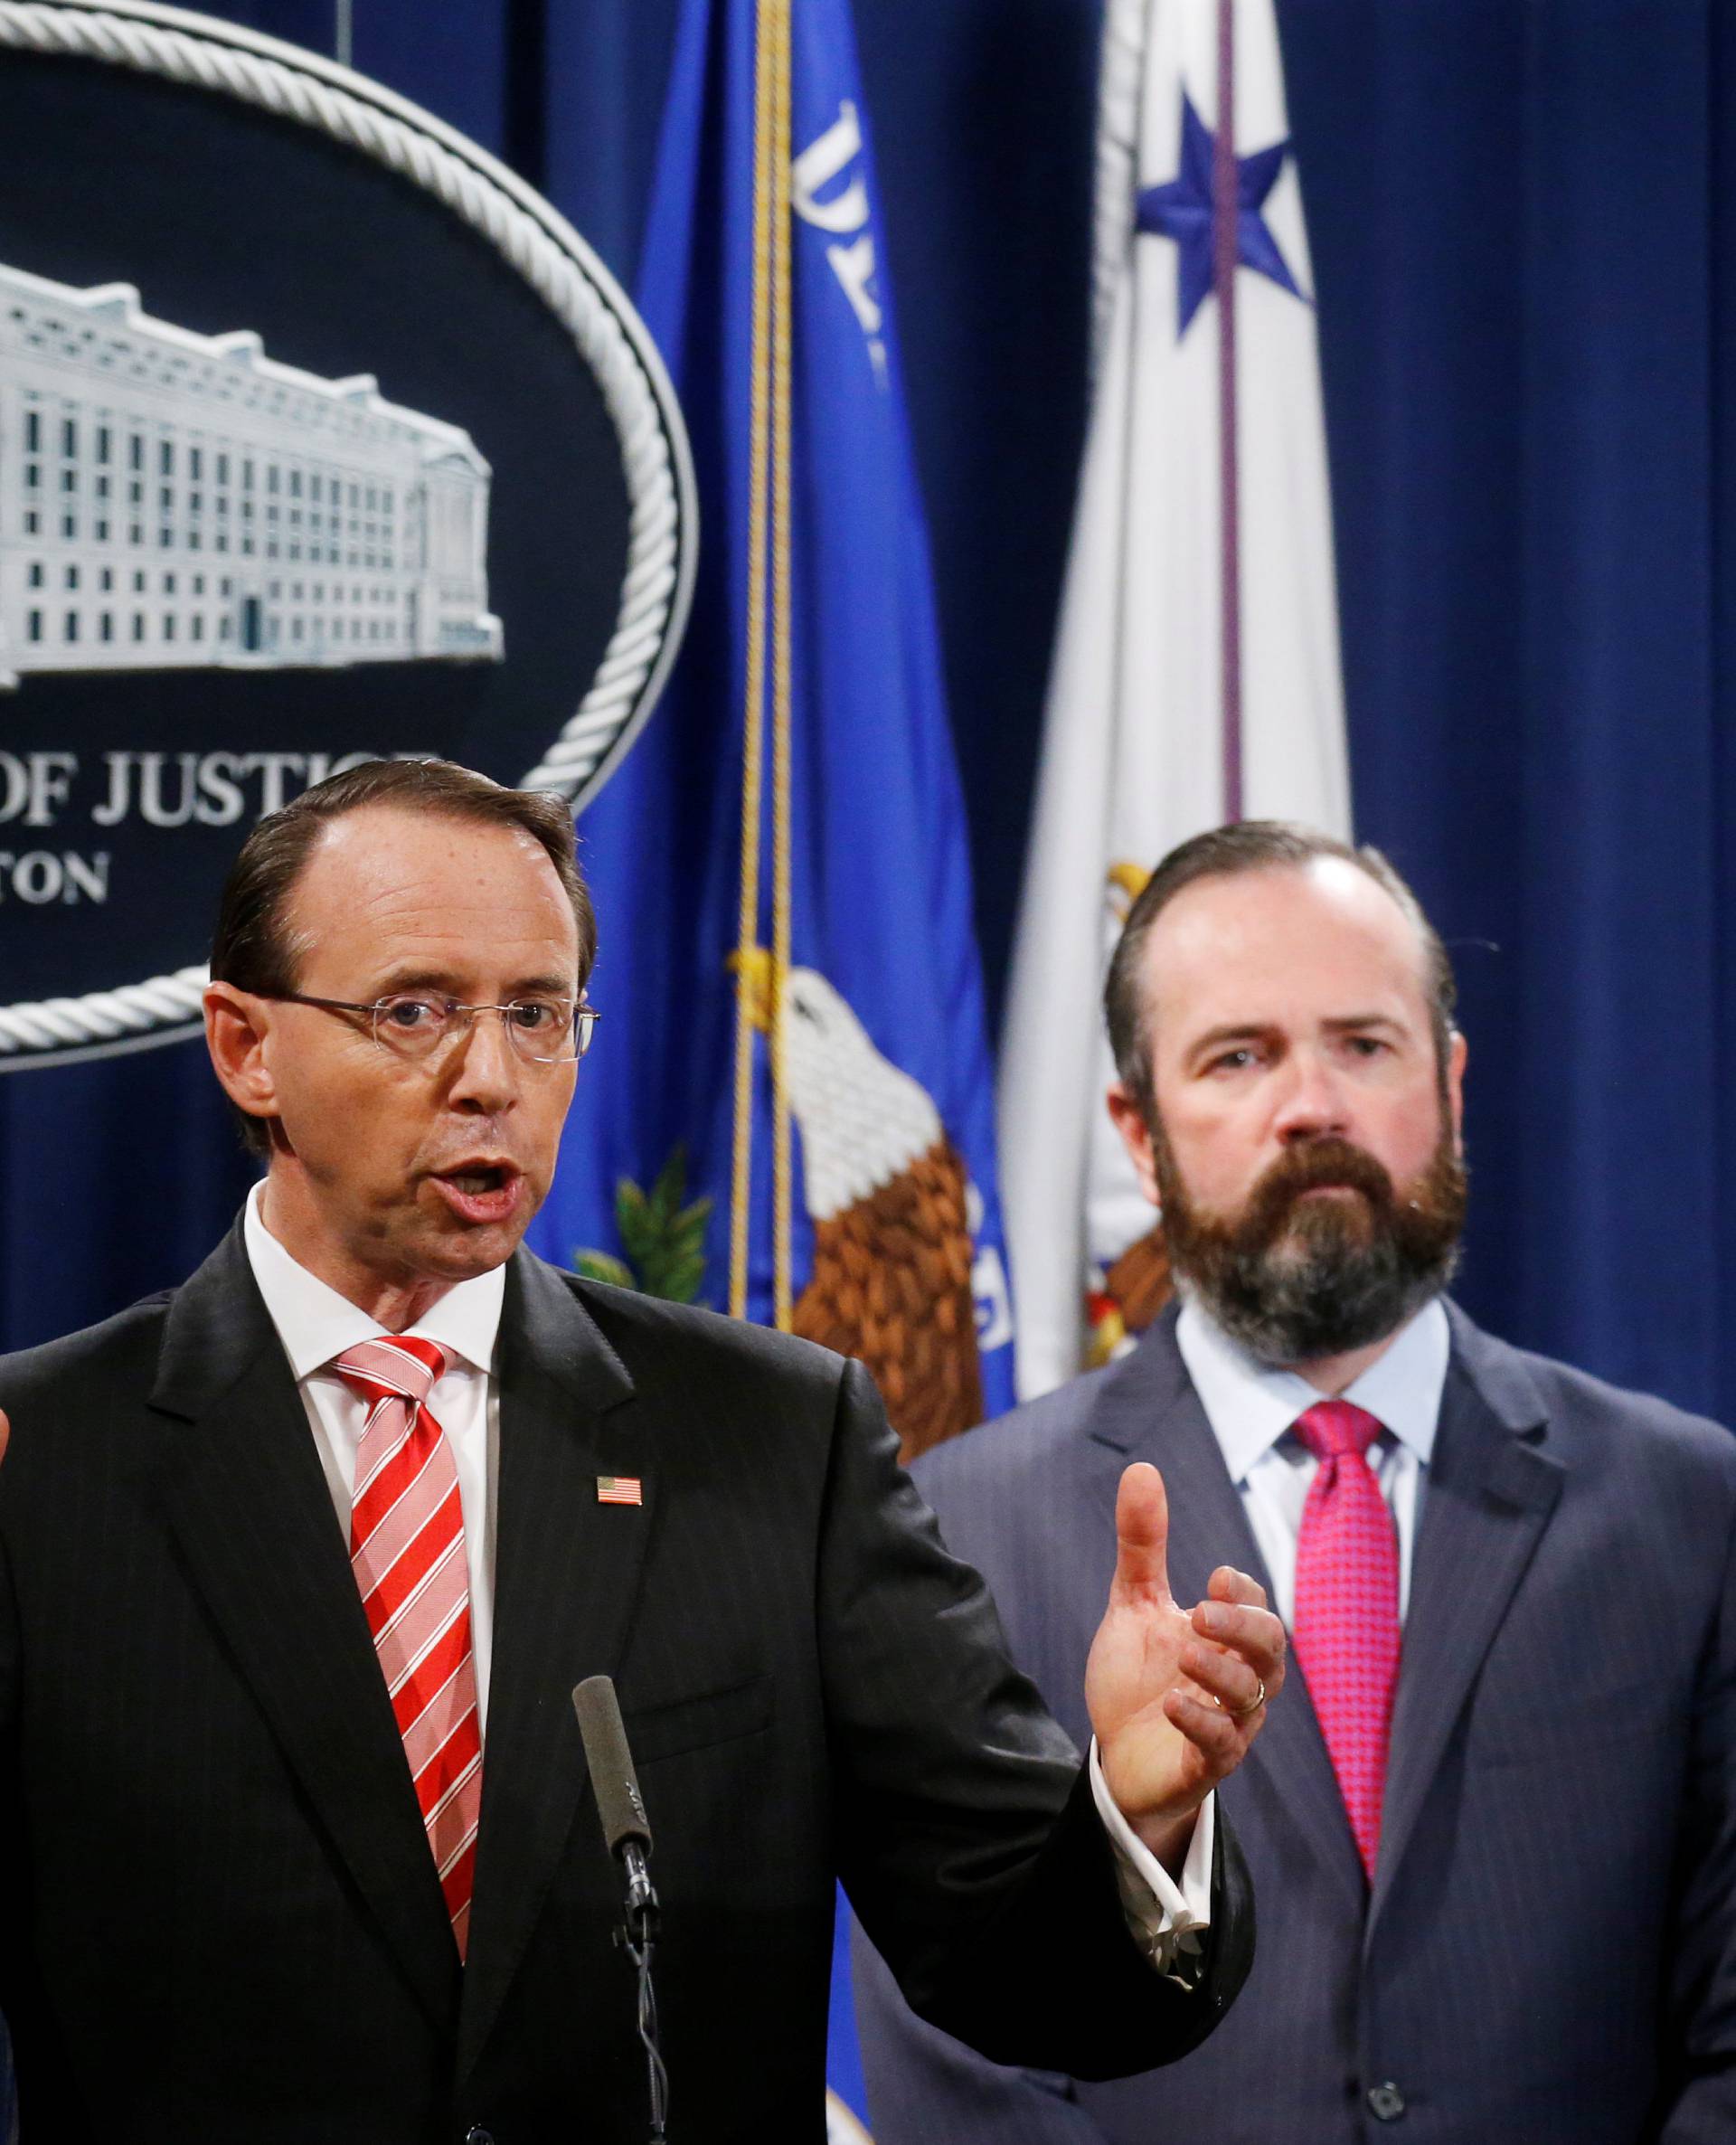 Deputy U.S. Attorney General Rosenstein announces indictments in special counsel Mueller's Russia investigation at the Justice Department in Washington